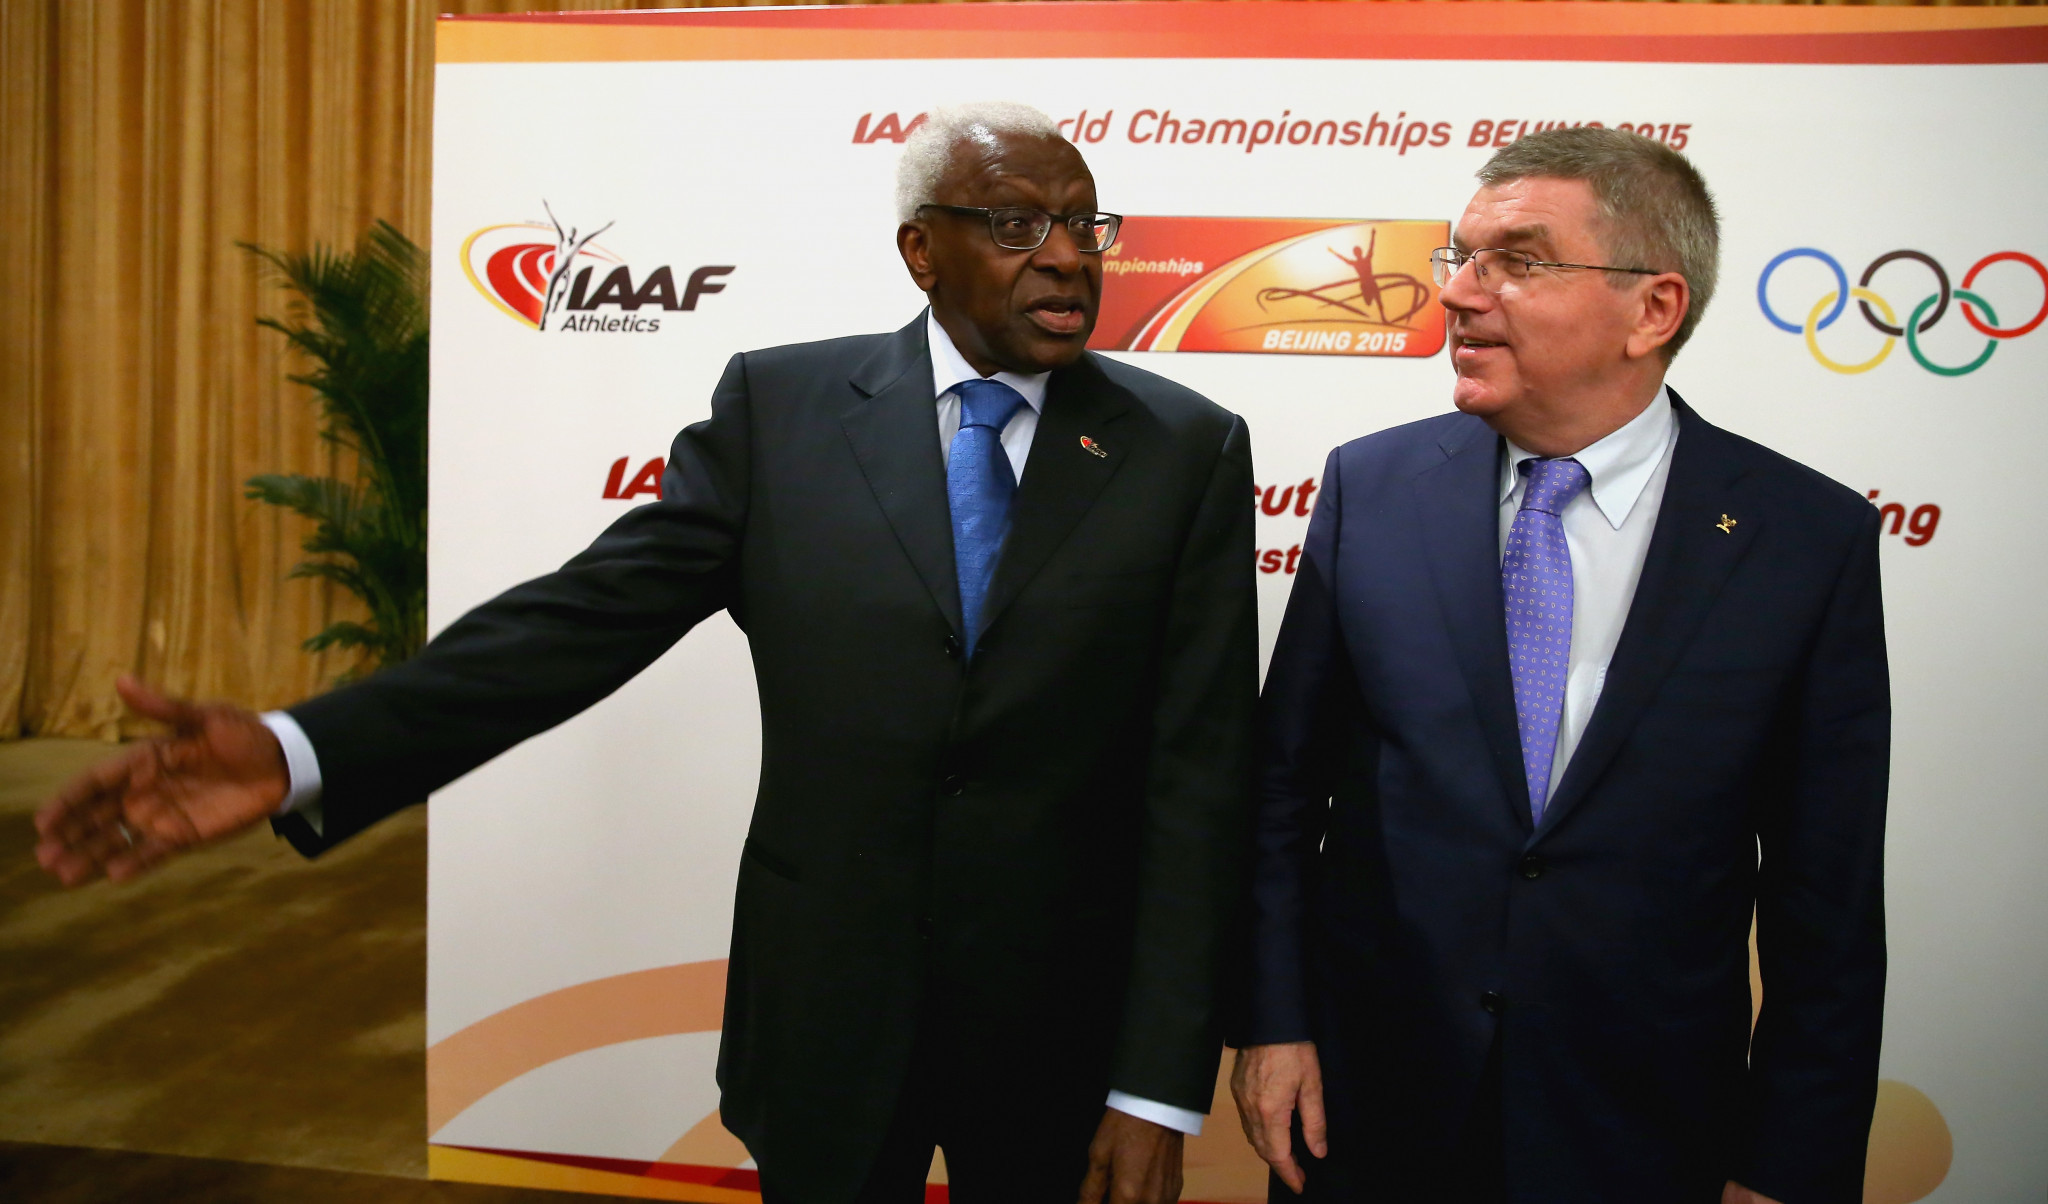 Before the current corruption scandal, Lamine Diack was a highly influential and revered IOC member, especially among his African colleagues ©Getty Images